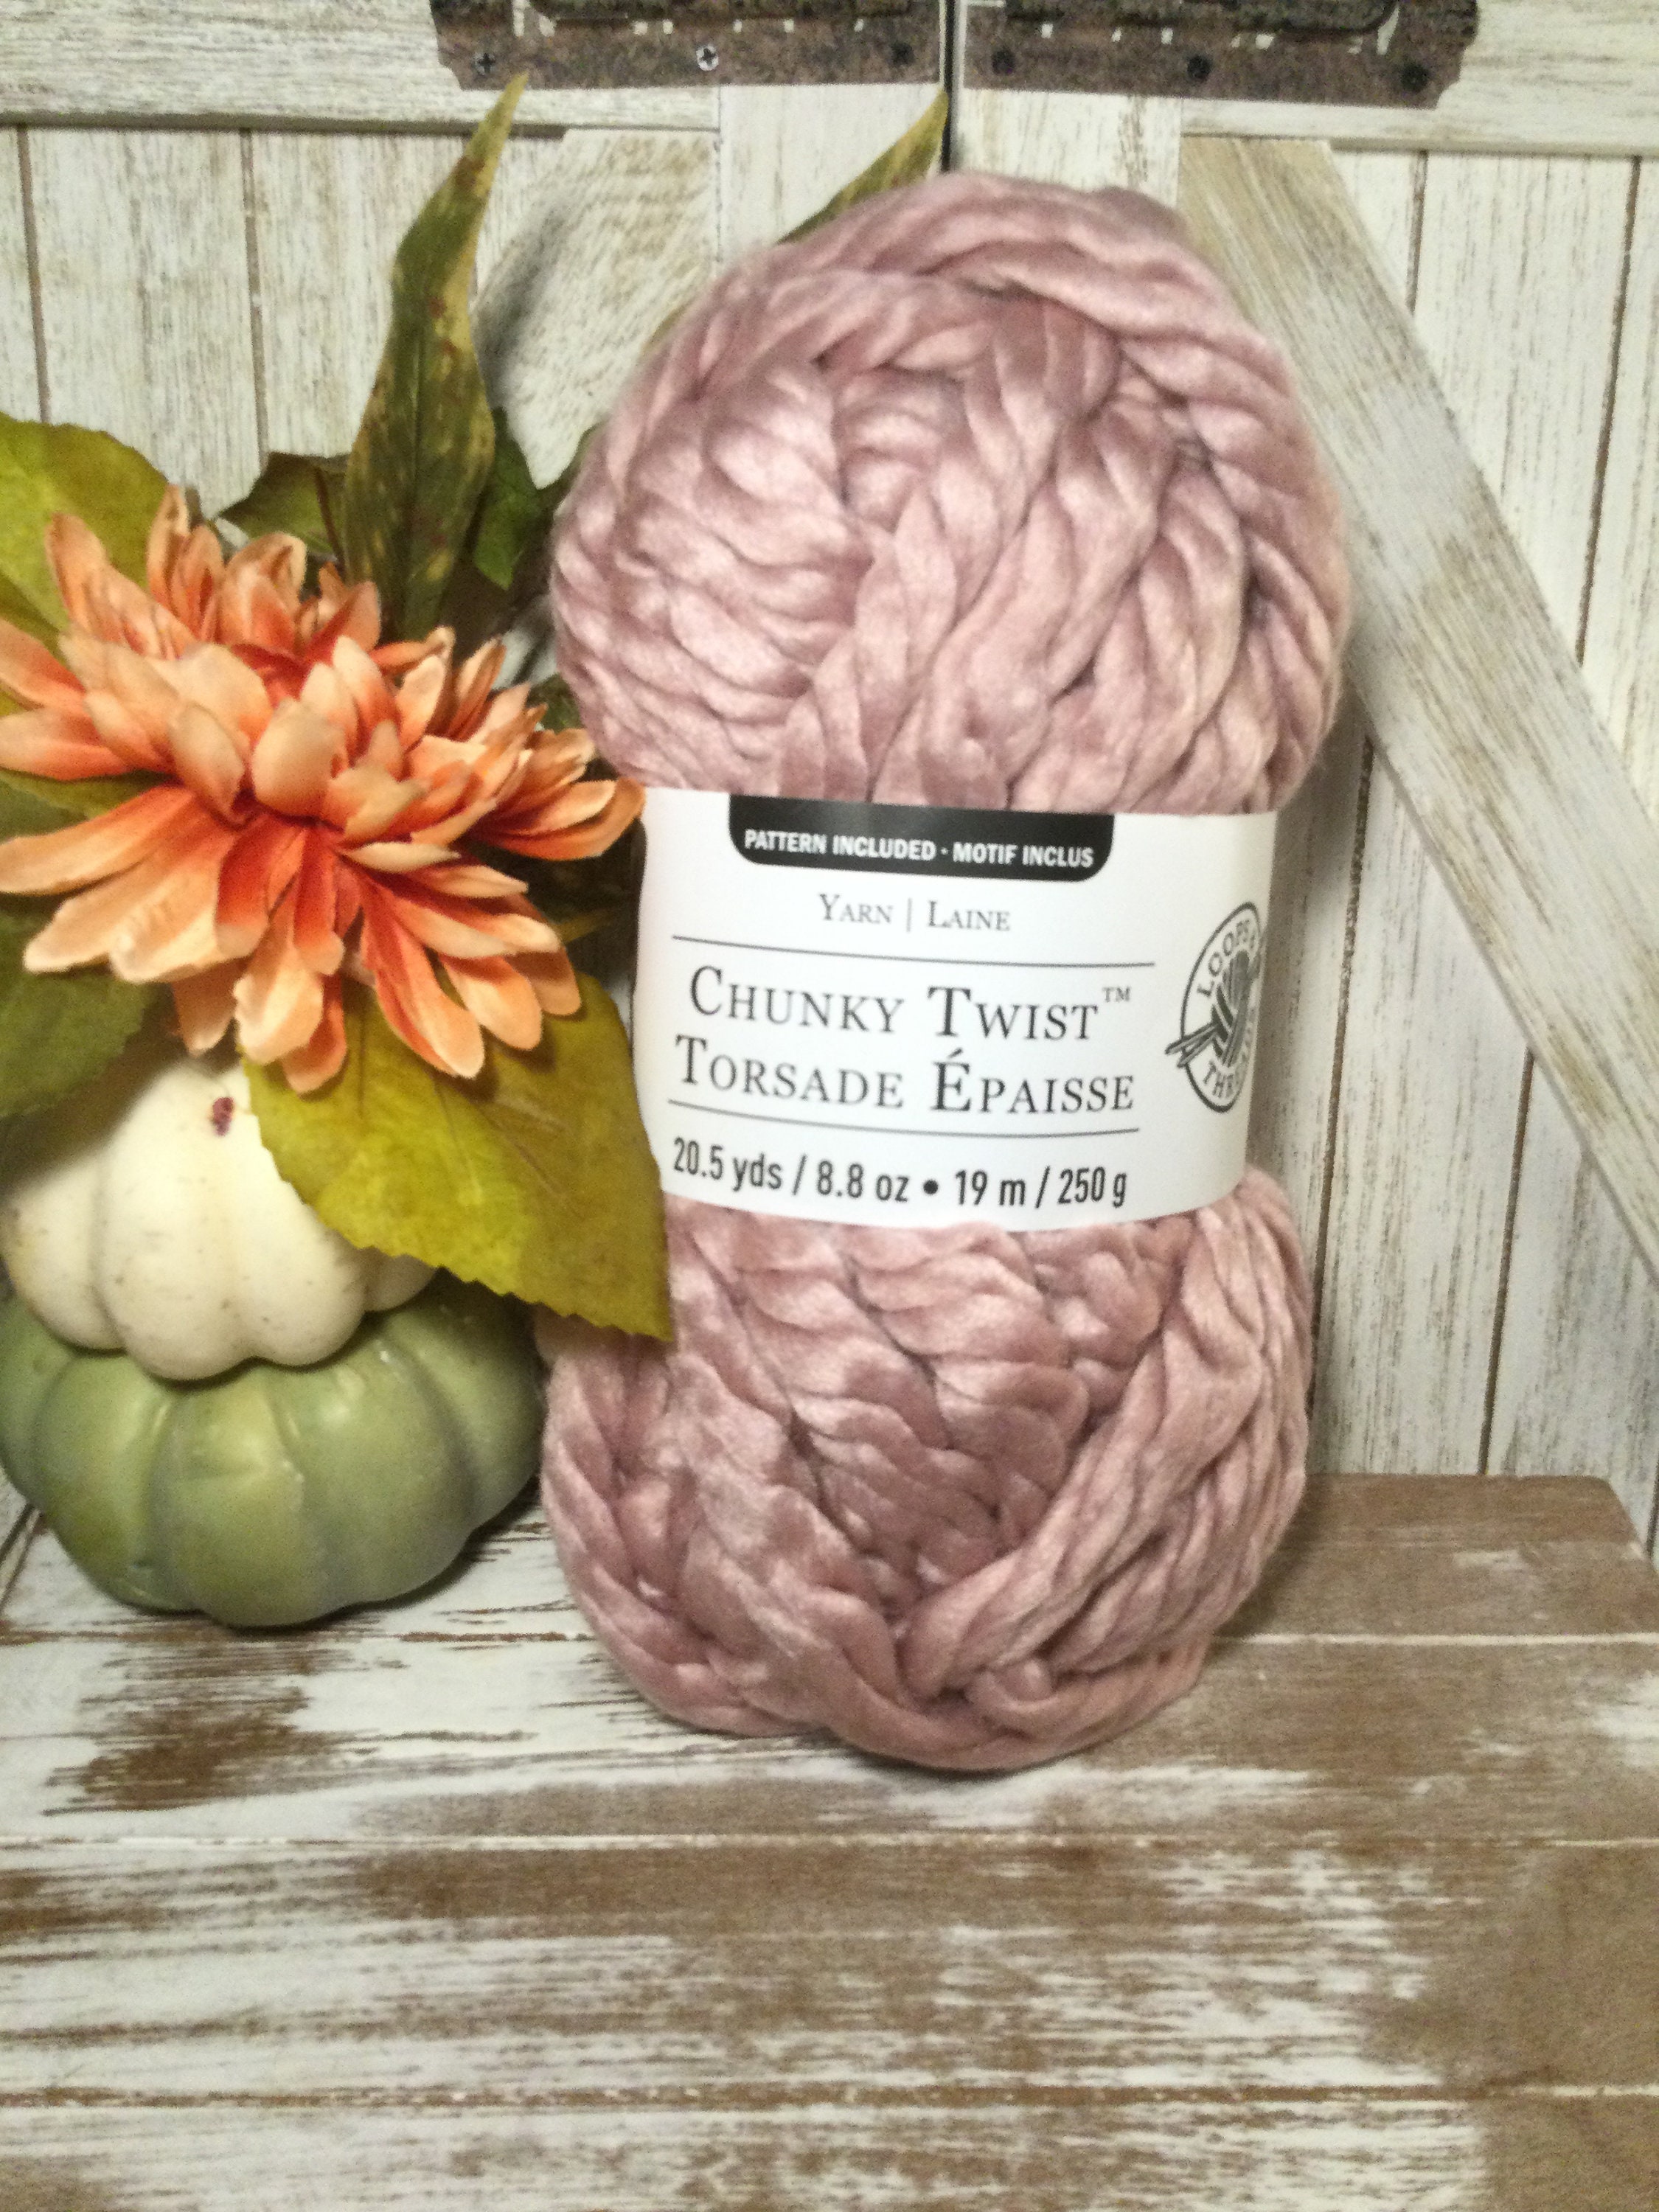 LOOPS & THREADS Soft and Shiny Ombre Yarn Knitting Supplies, Crochet  Supplies YARN Supplies 